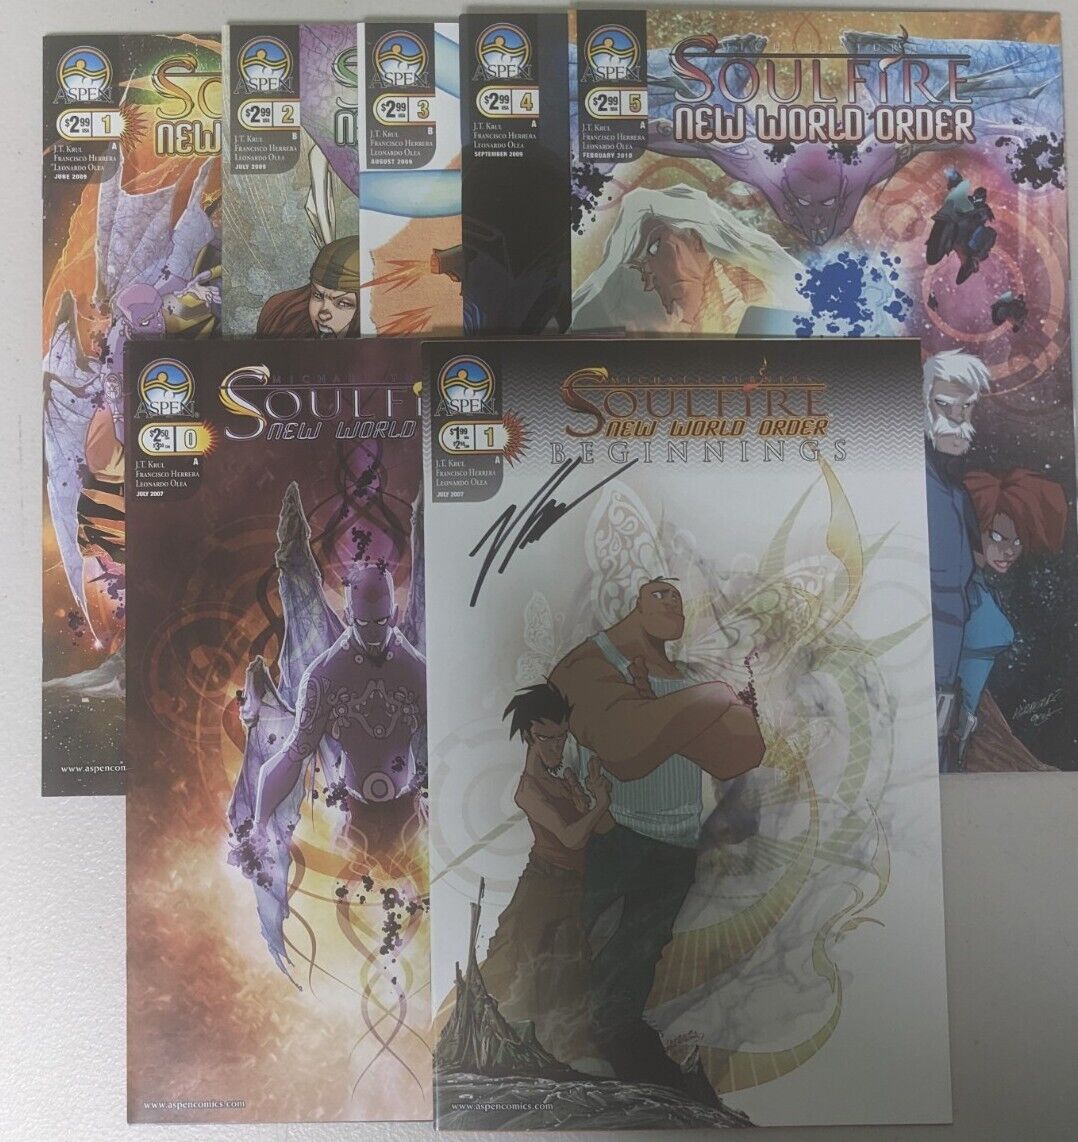 Michael Turner's Soulfire New World Order #0-1 & #1-5 beginnings signed by VINCE